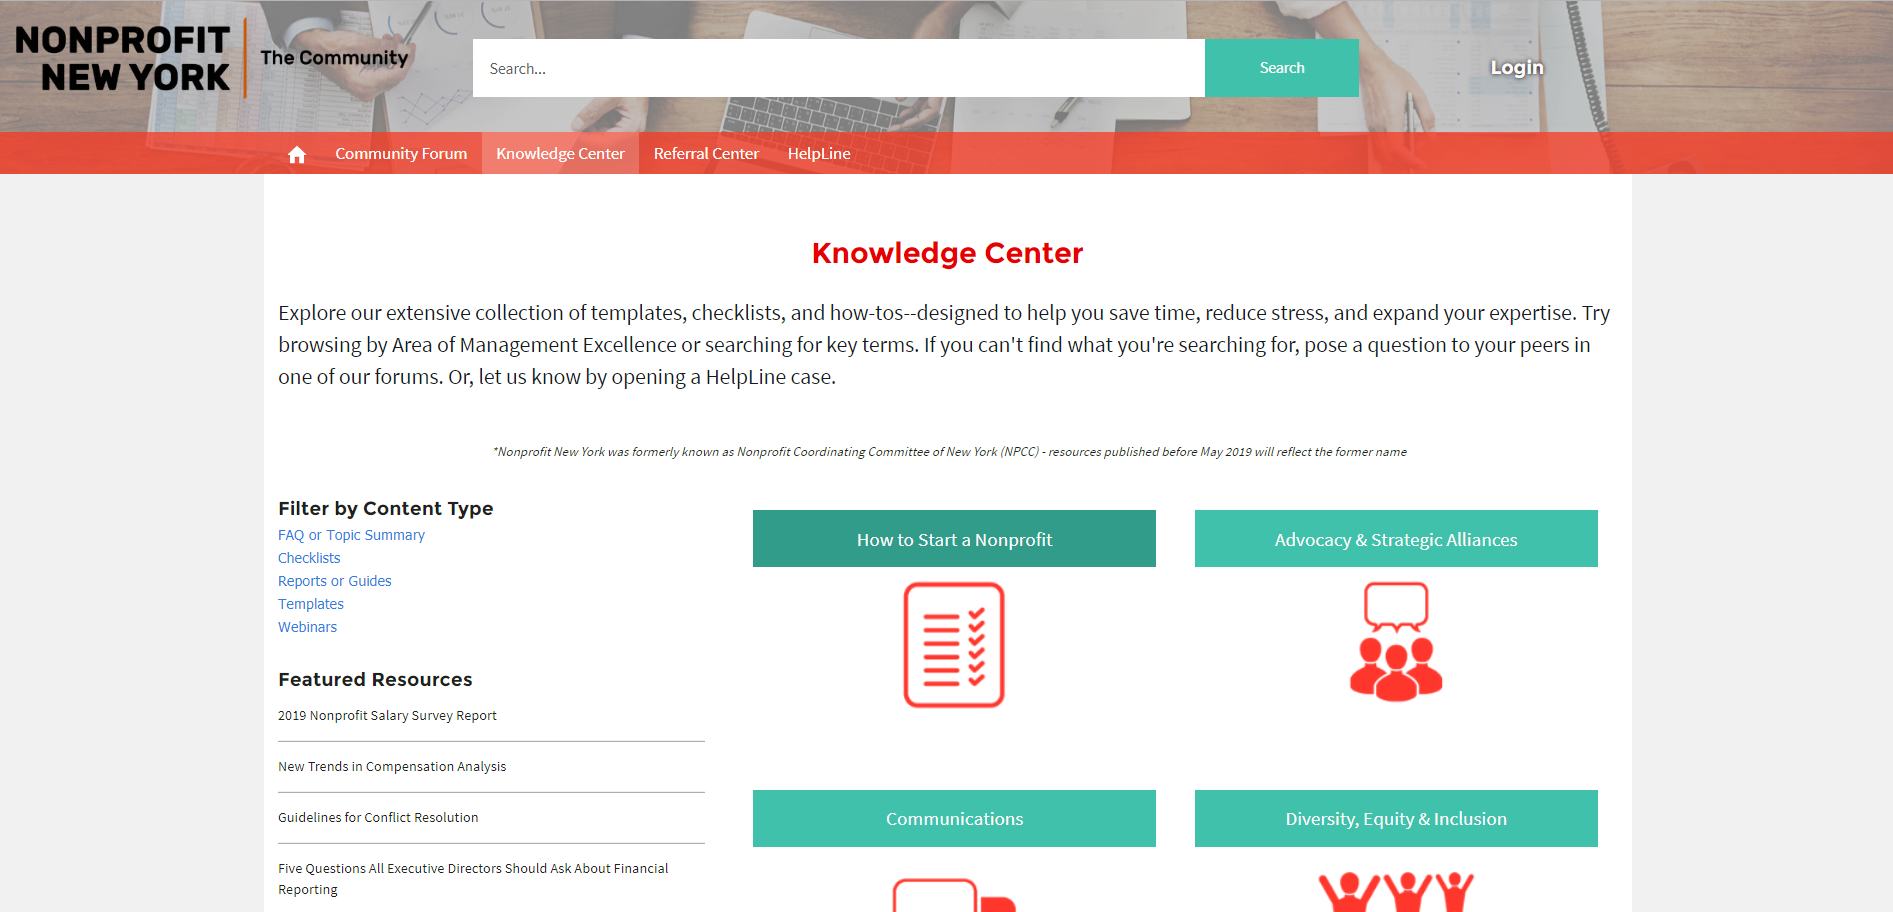 The Knowledge Center for the Salesforce Community